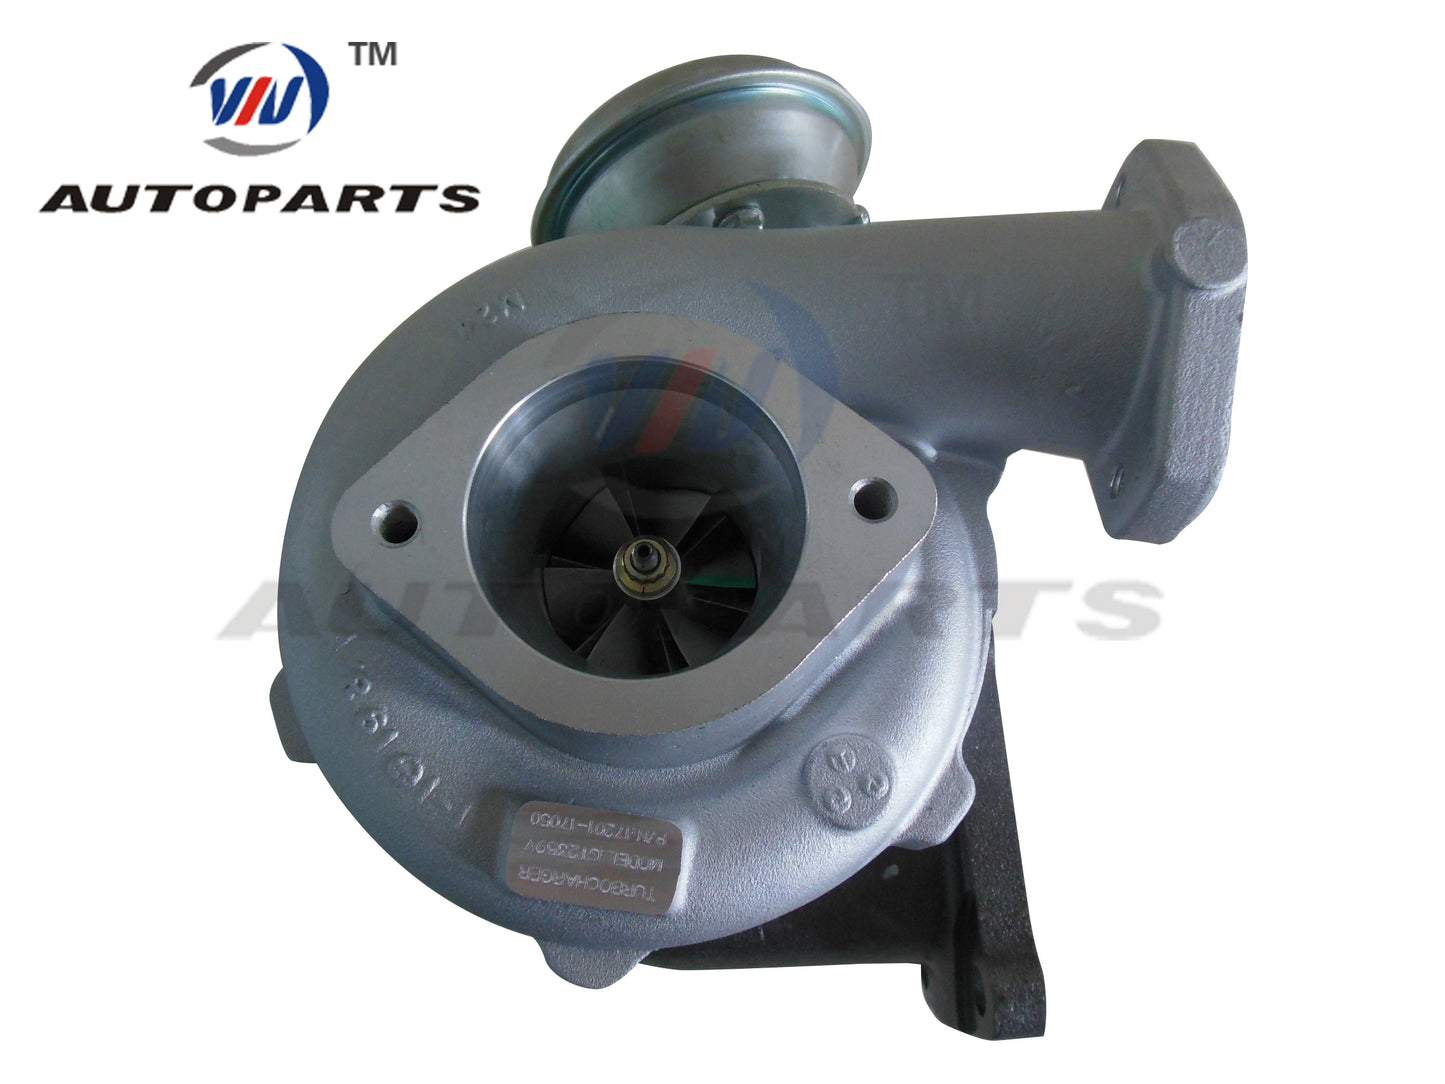 VIV AUTOPARTS Turbocharger 724483-5009S for Toyota Land Cruiser 100 (5at) with 1HD-FTE Euro3 4.2L Diesel Engine